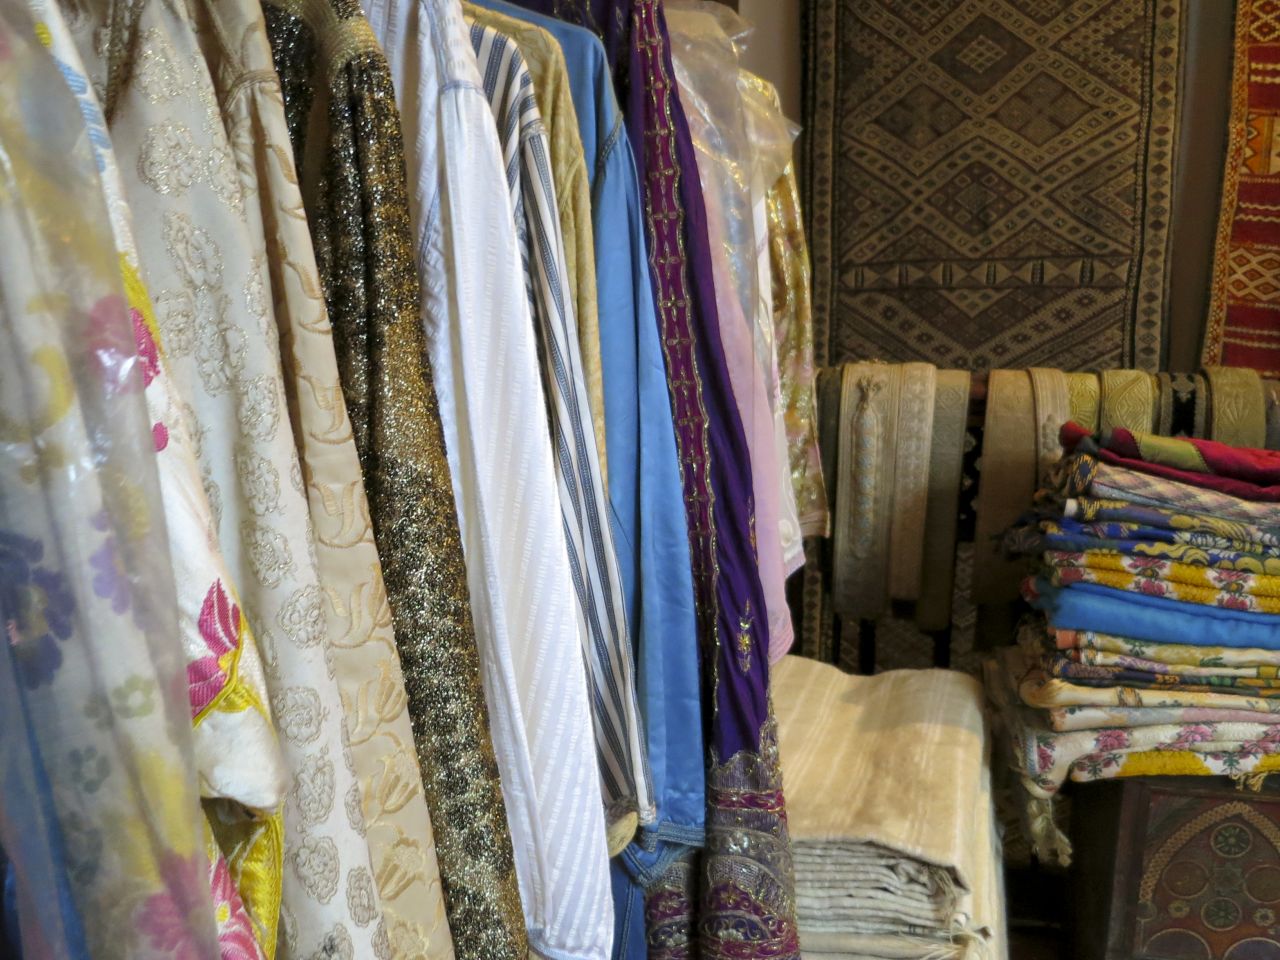 Boutique Majid is also known for its textiles.